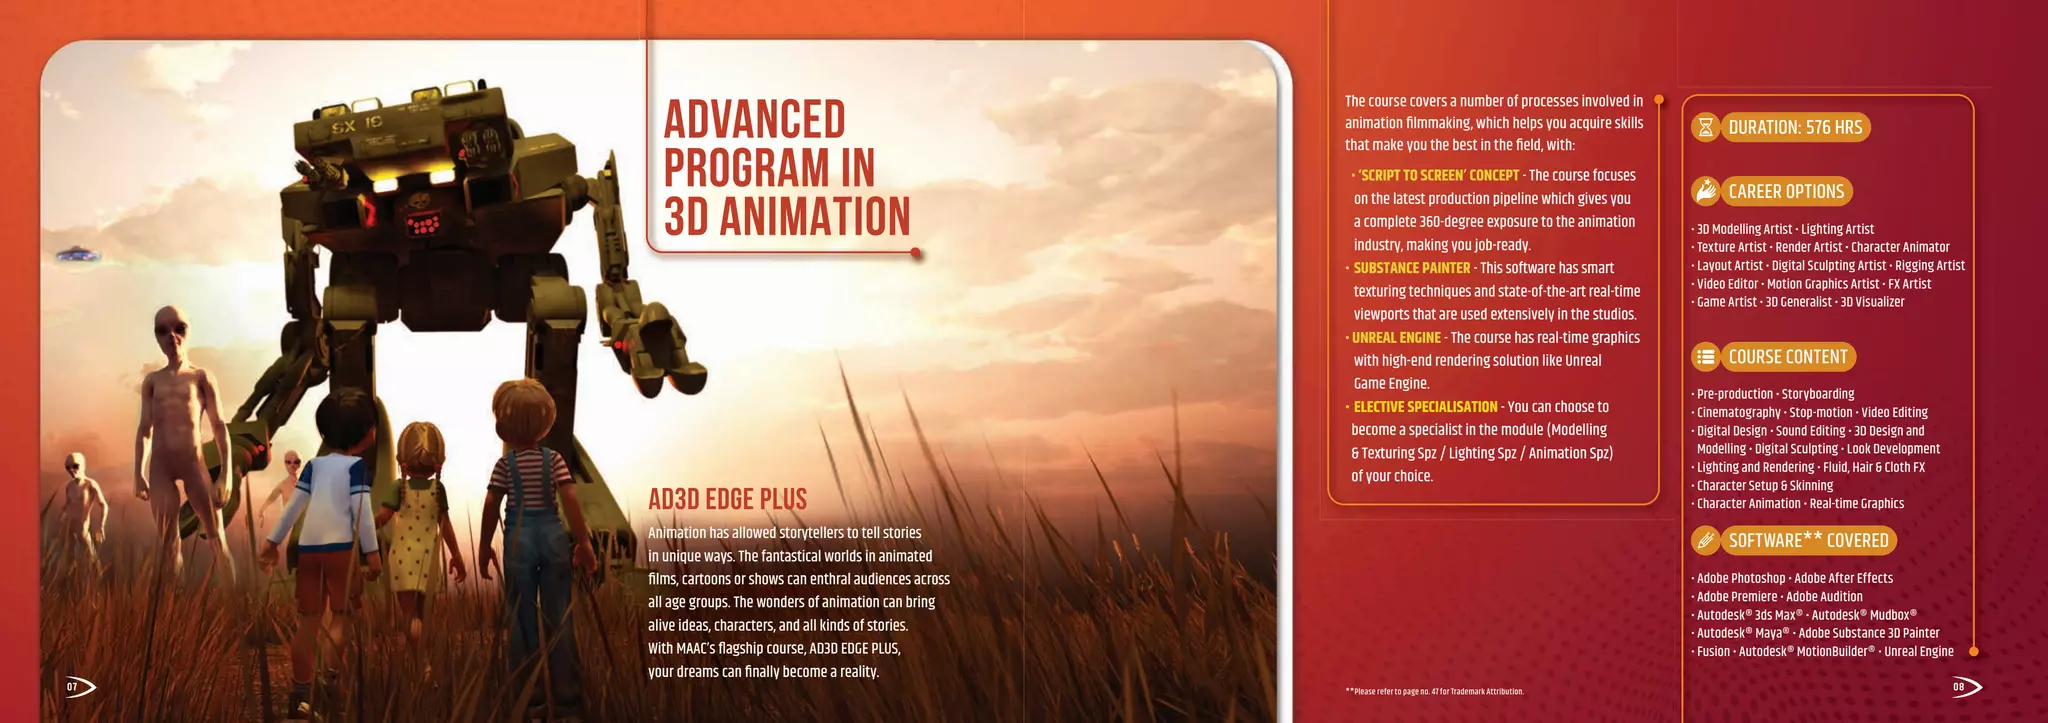 Maac Ameeerpet - VFX, Animation and Gaming Training Center in Hyderab…